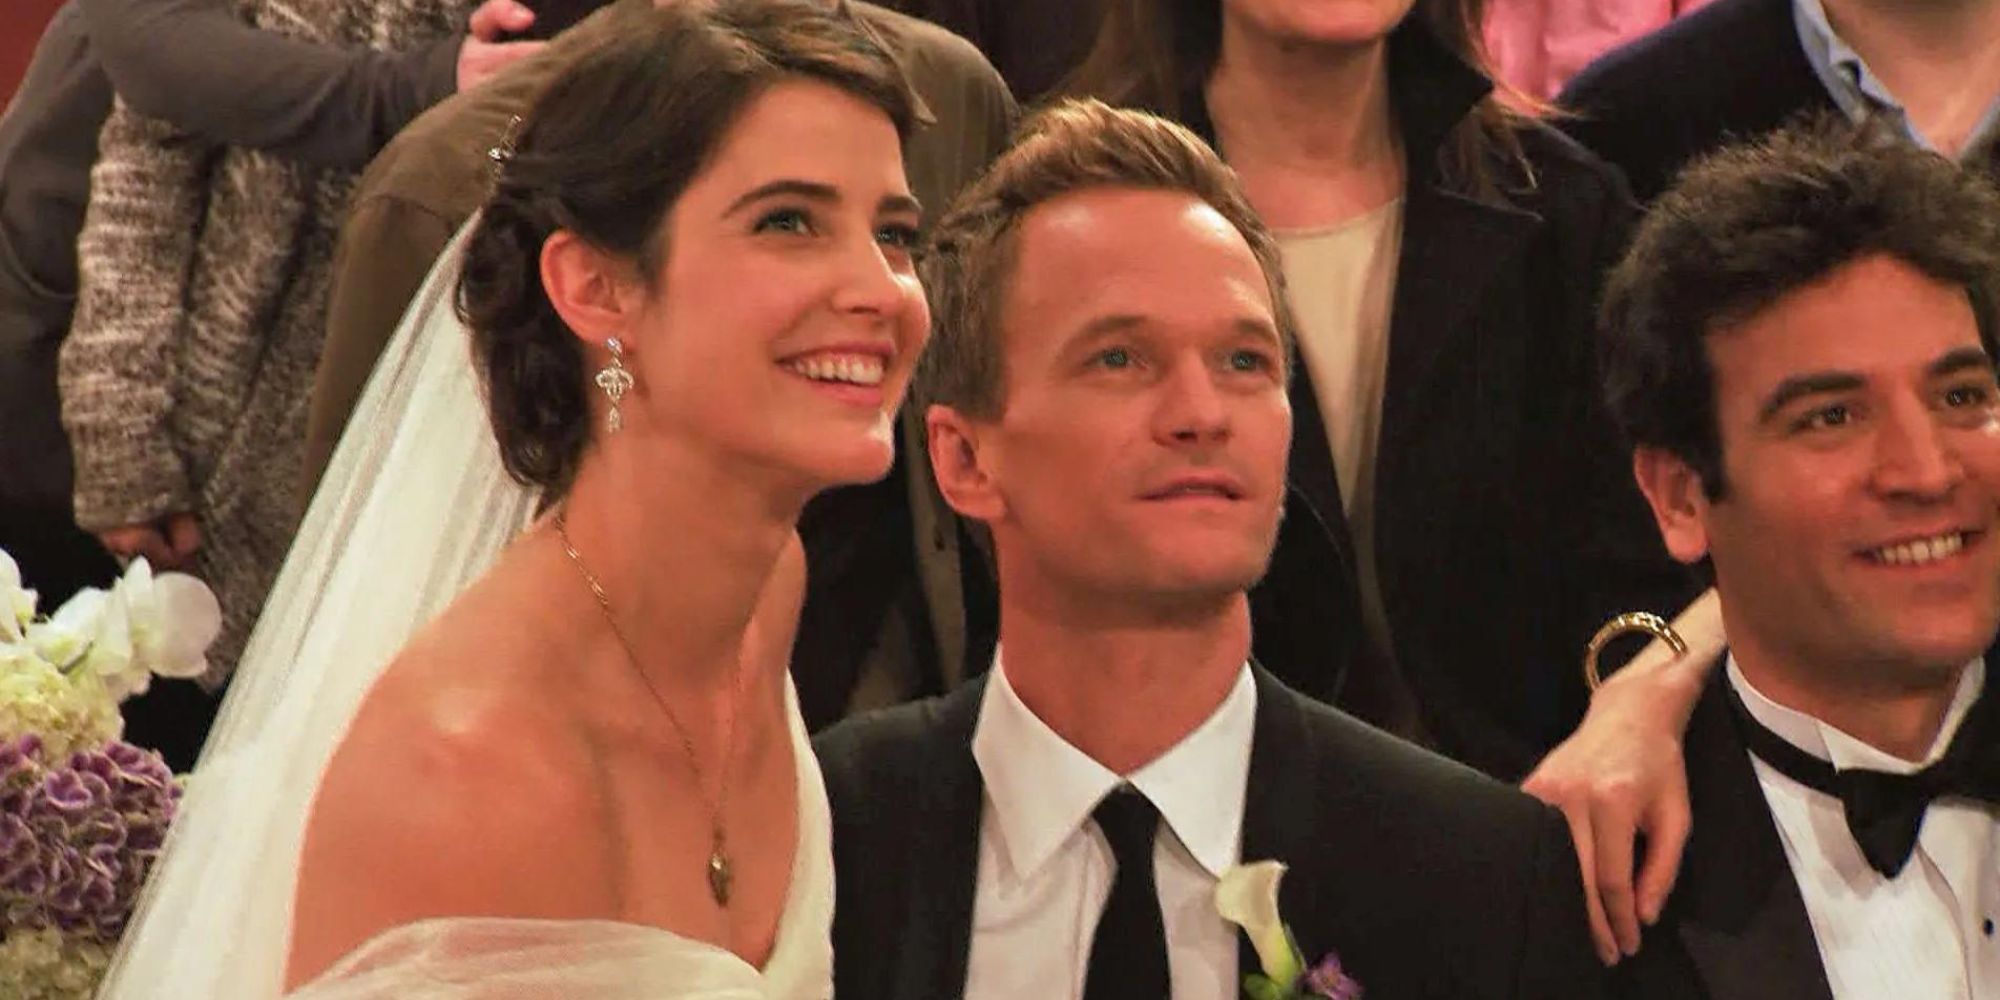 Barney and Robin from How I Met Your Mother at their wedding